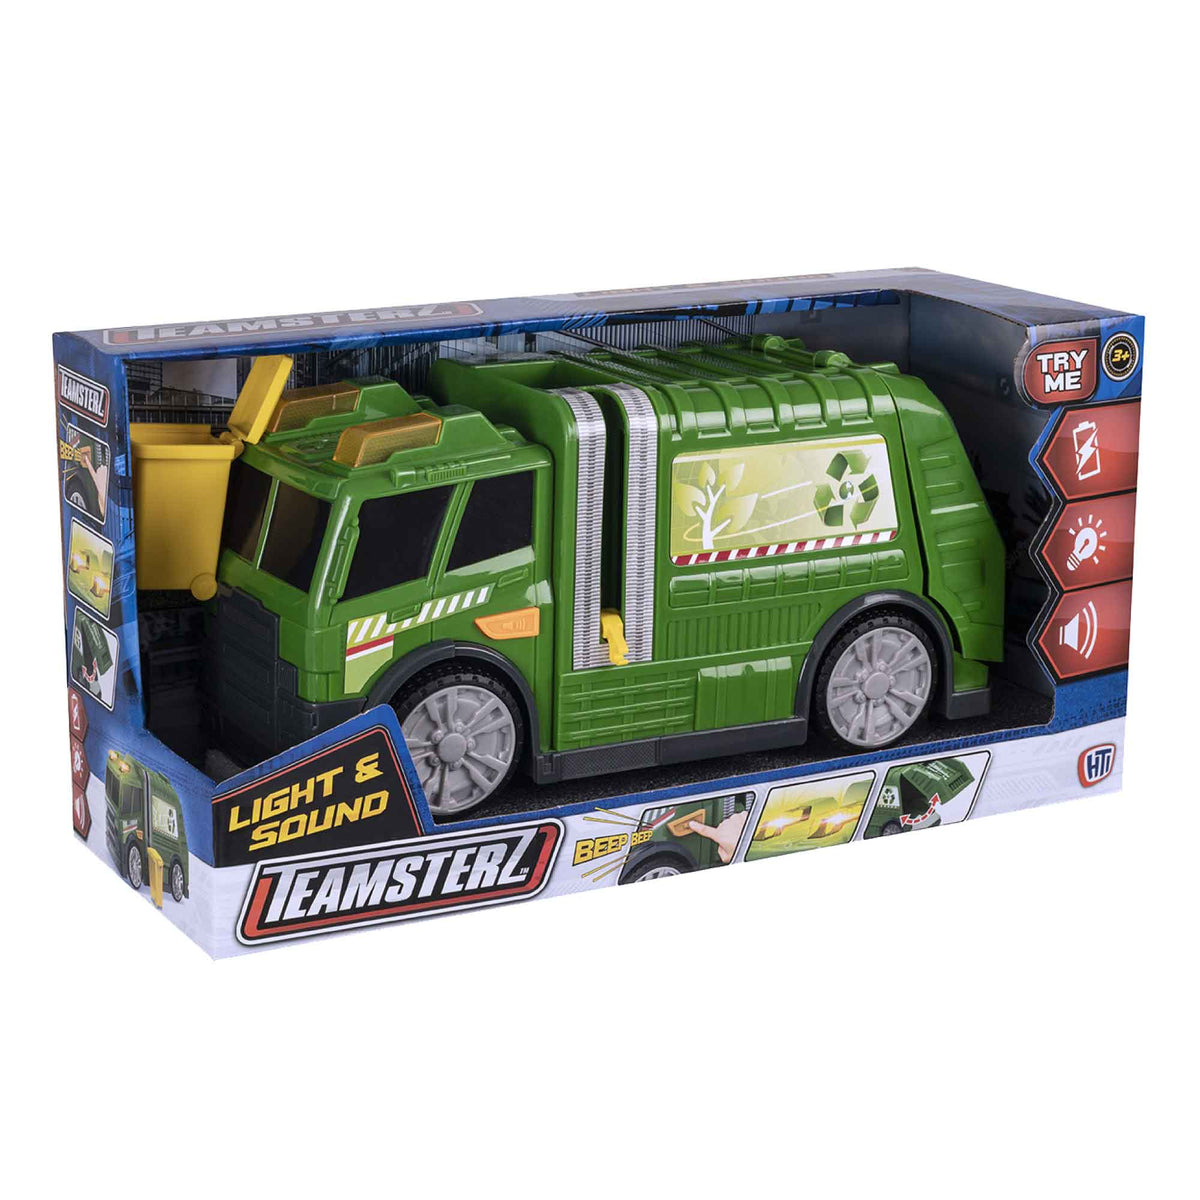 Teamsterz Mighty Machines Medium Light &amp; Sound Recycling Truck